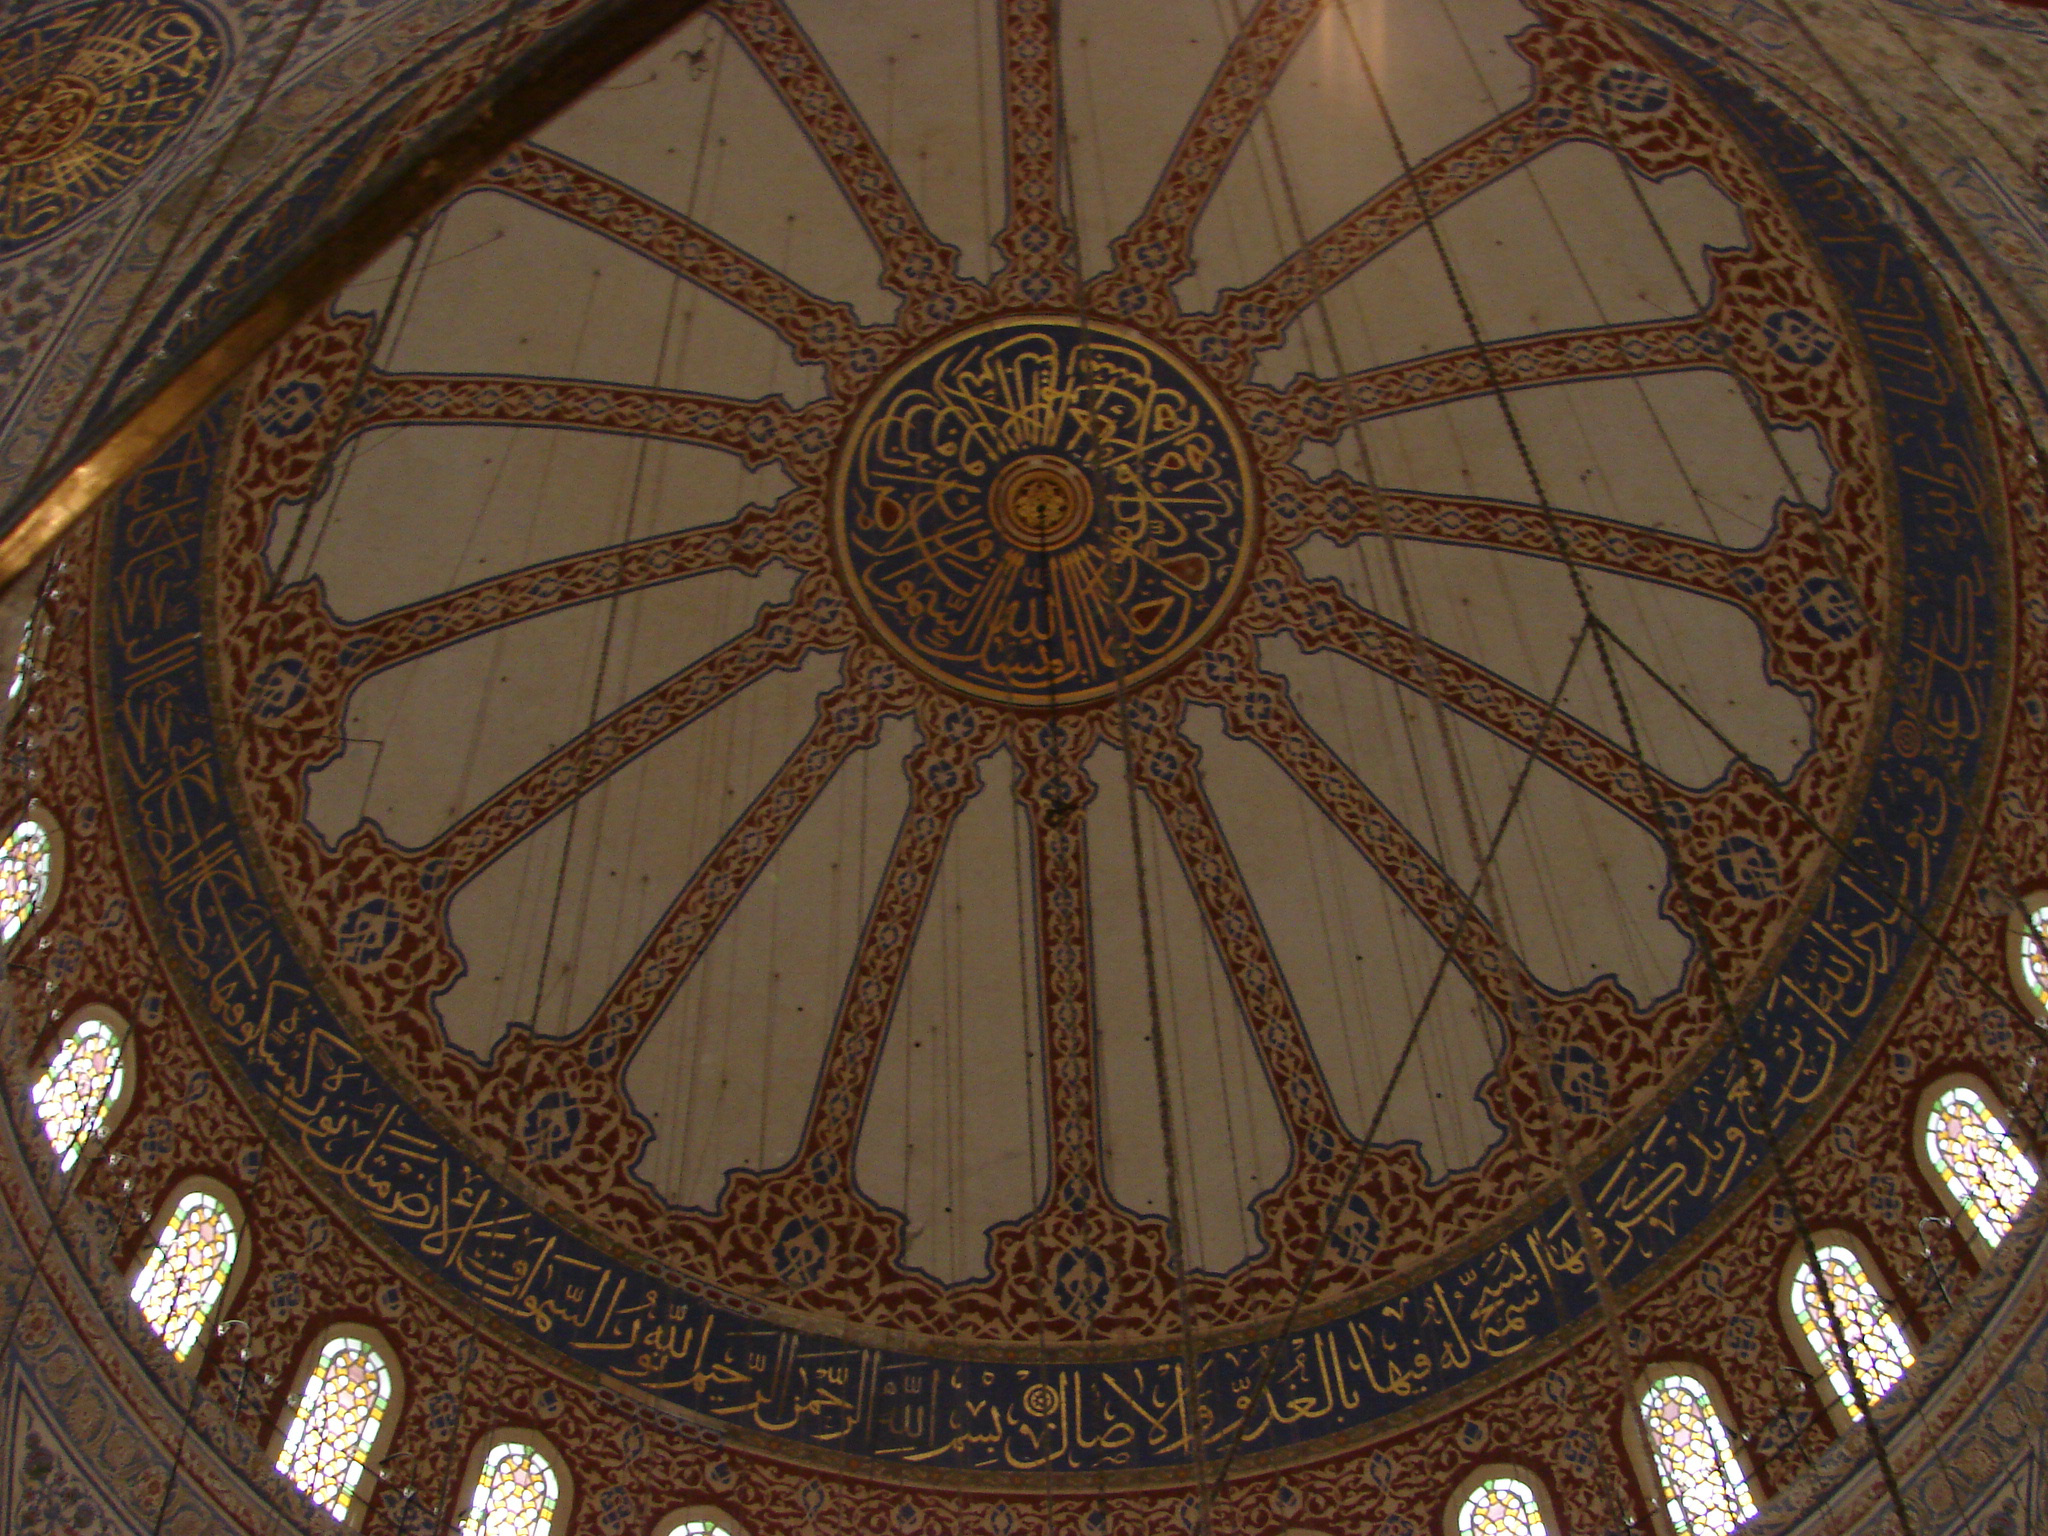 an ornate ceiling in a large building with several windows